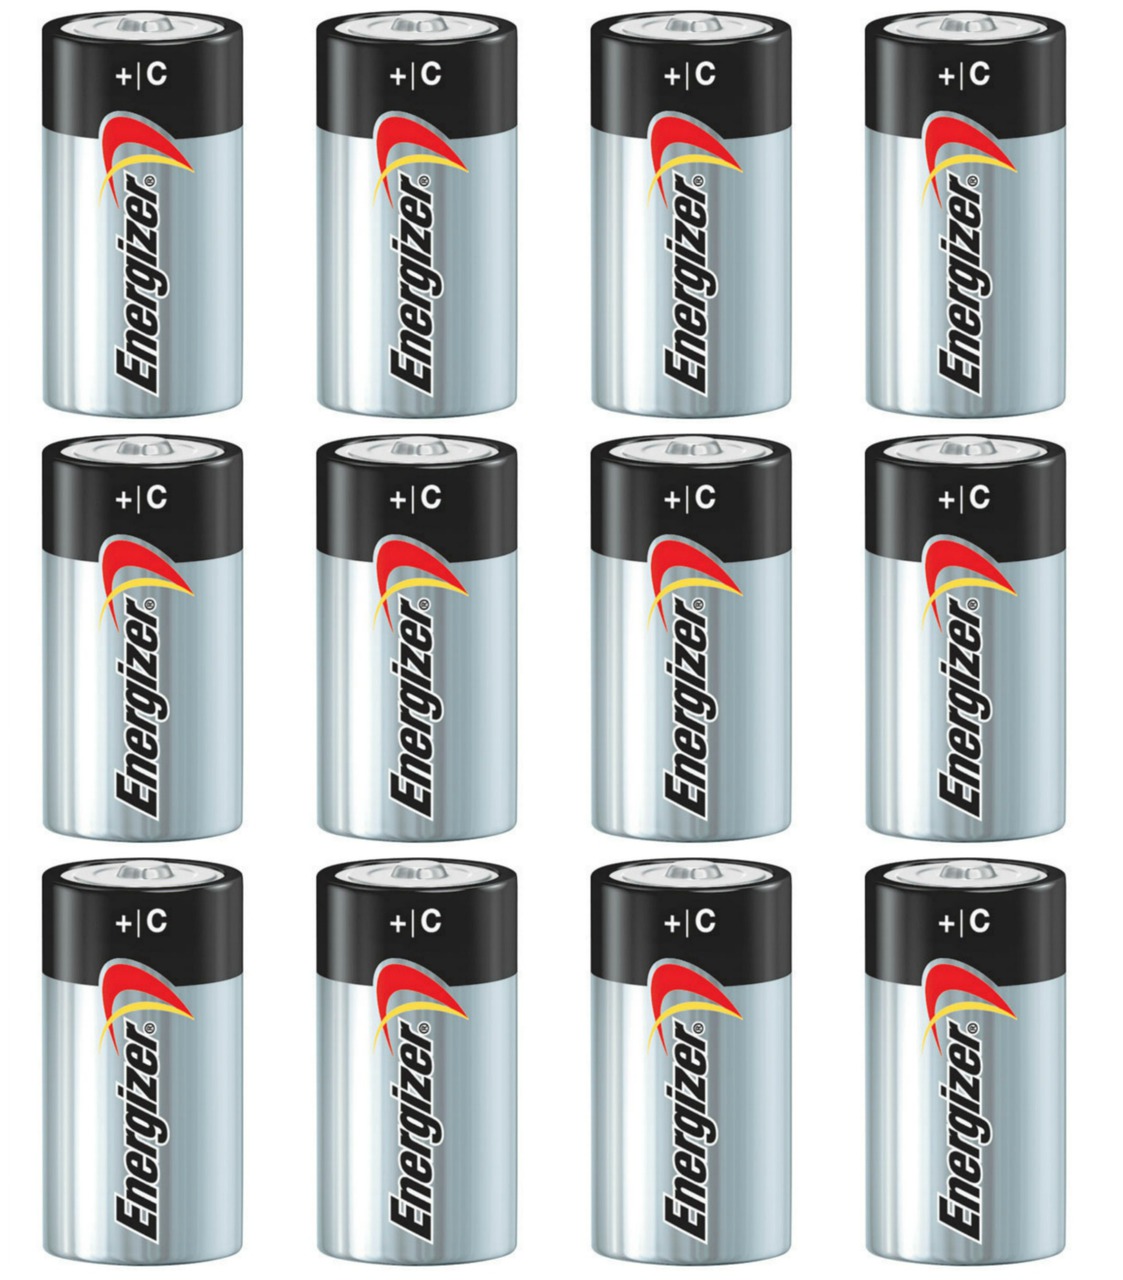 Energizer Max Alkaline C Size Batteries E93 - 12 Pack + FREE SHIPPING!